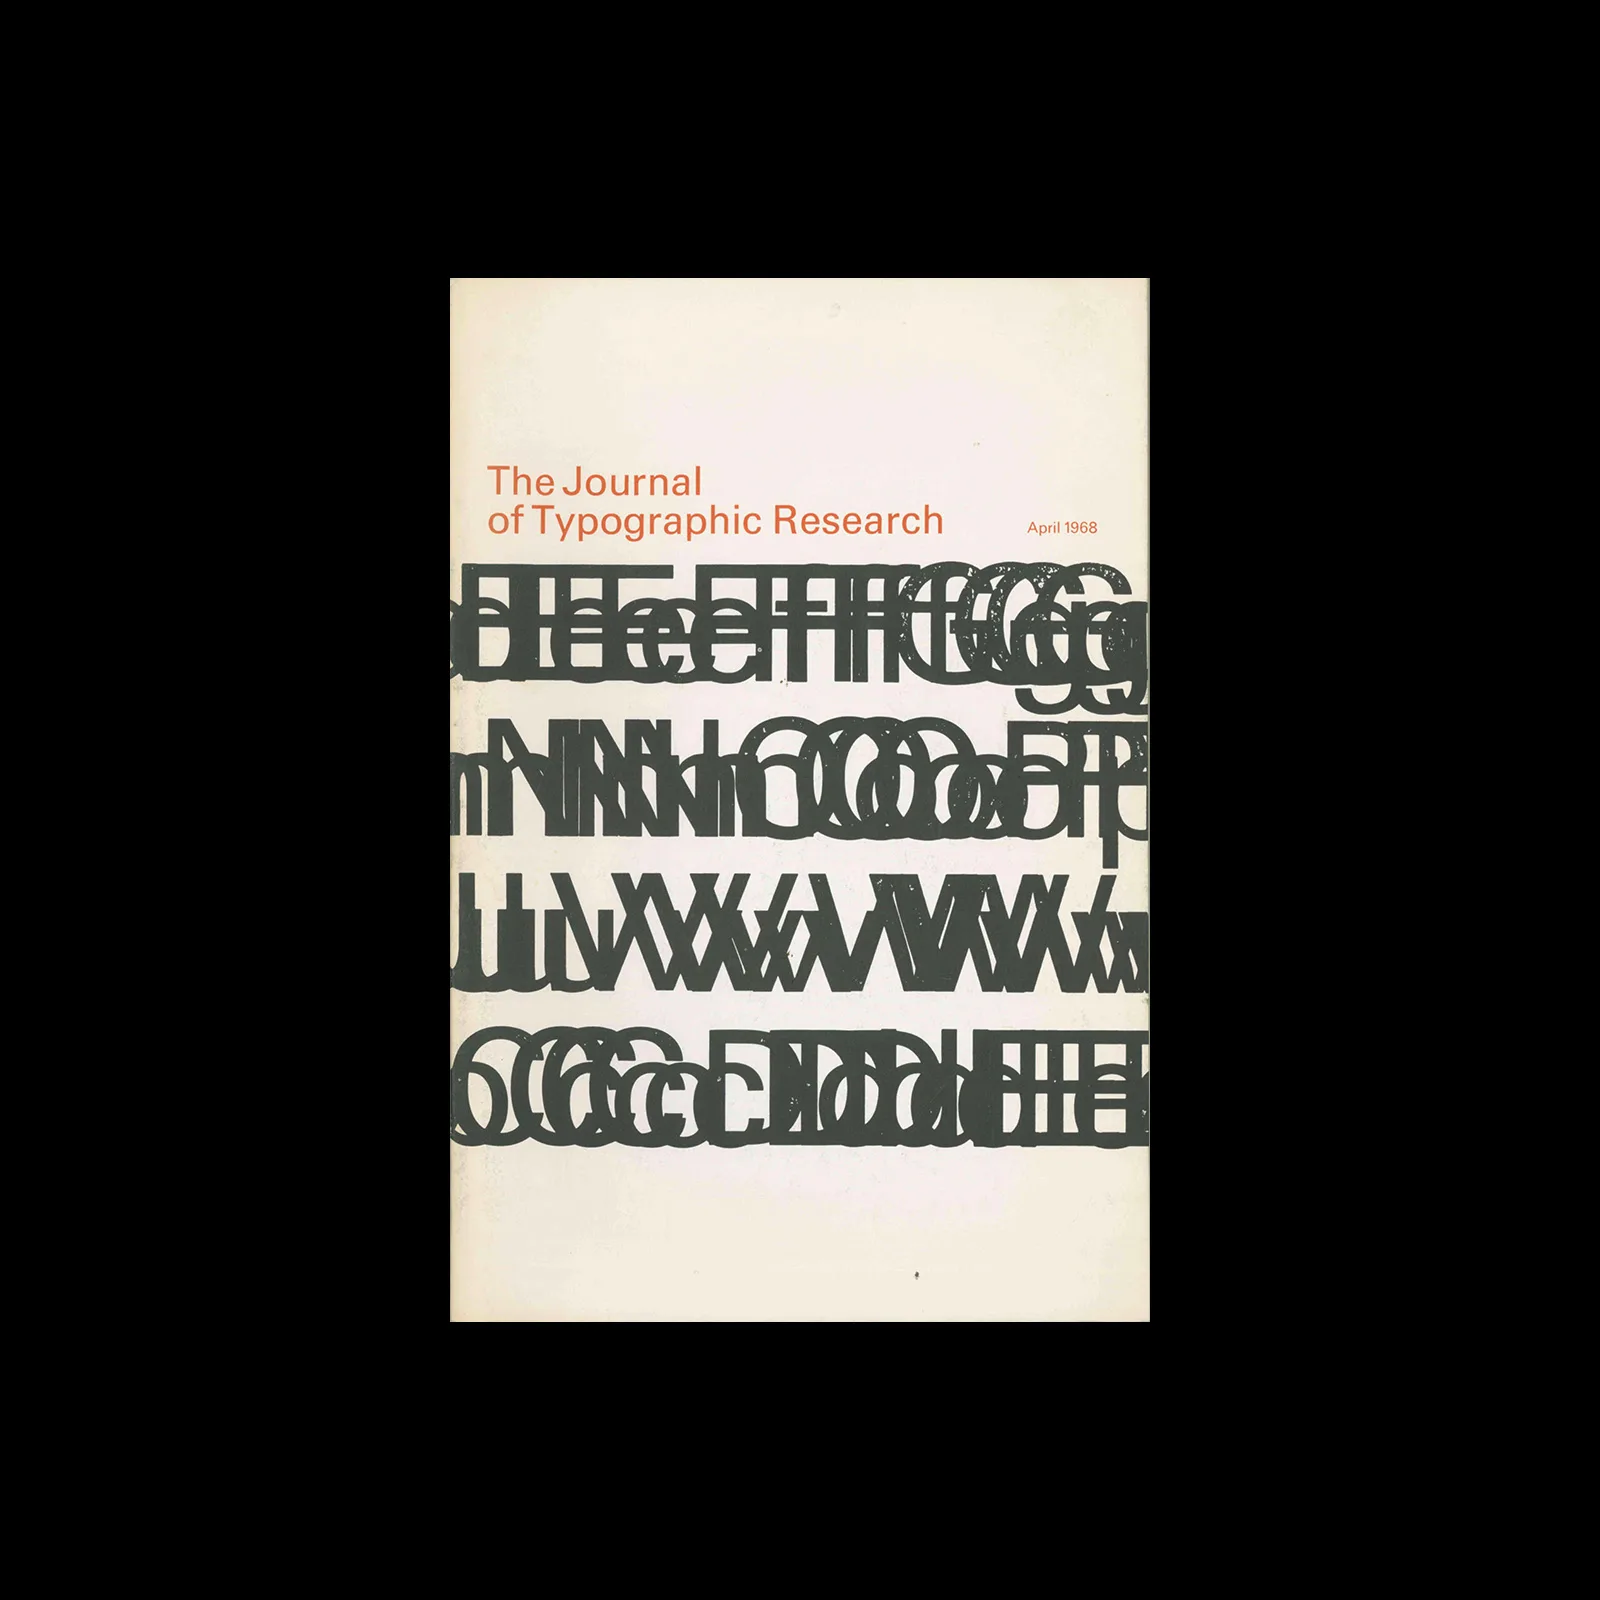 Visible Language (The Journal of Typographic Research, Vol 02, 02, April 1968